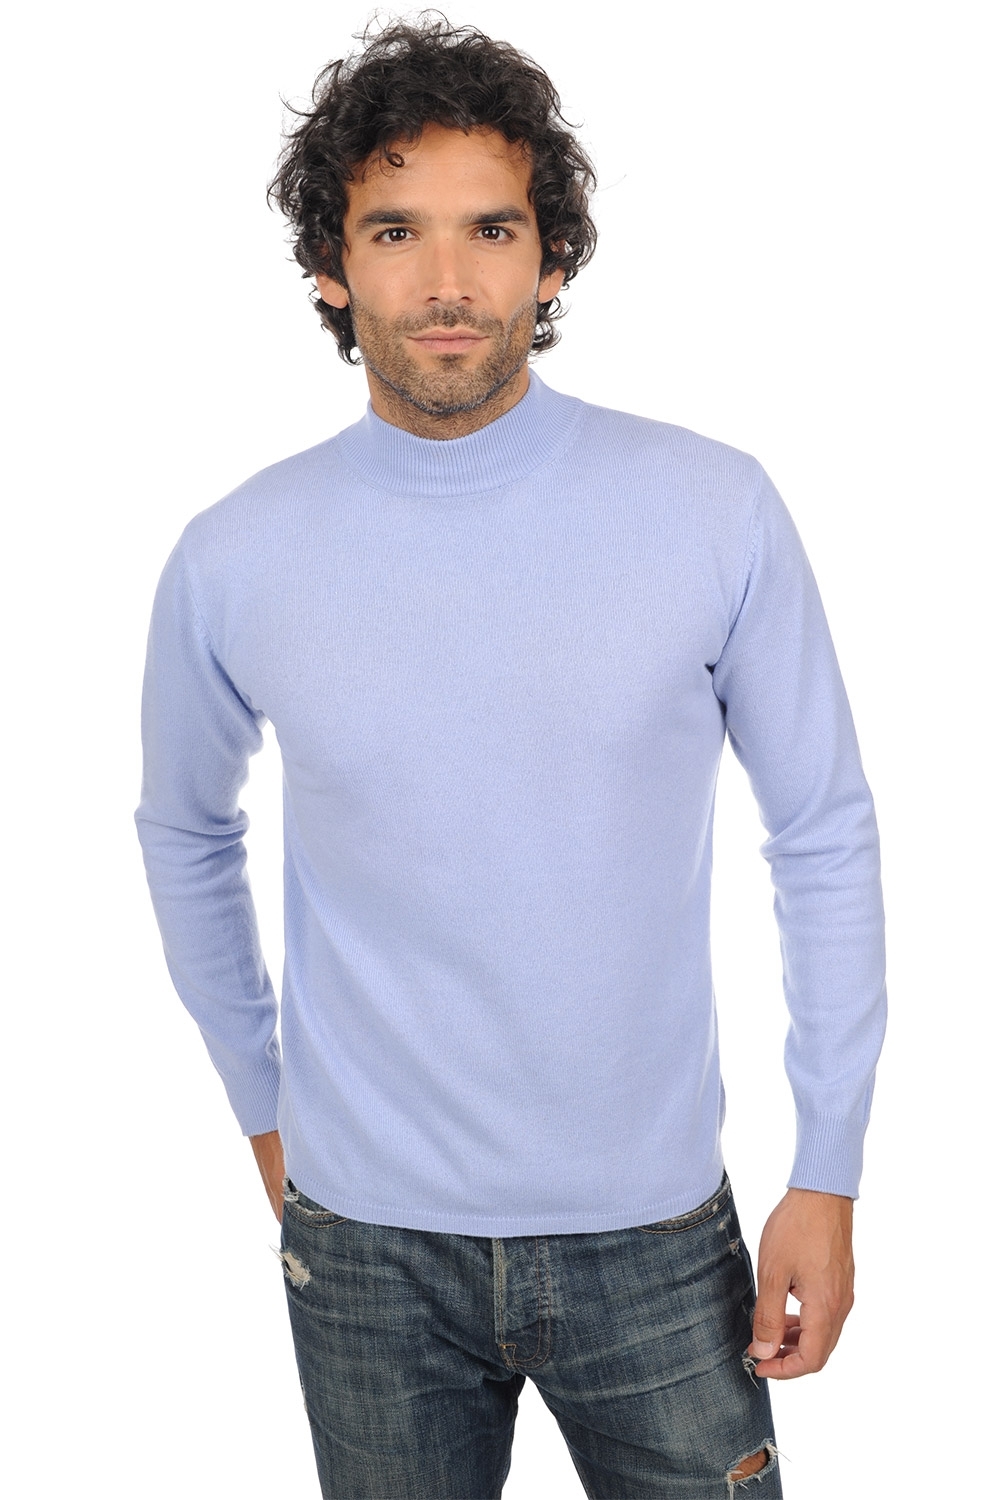 Cachemire pull homme frederic ciel 3xl